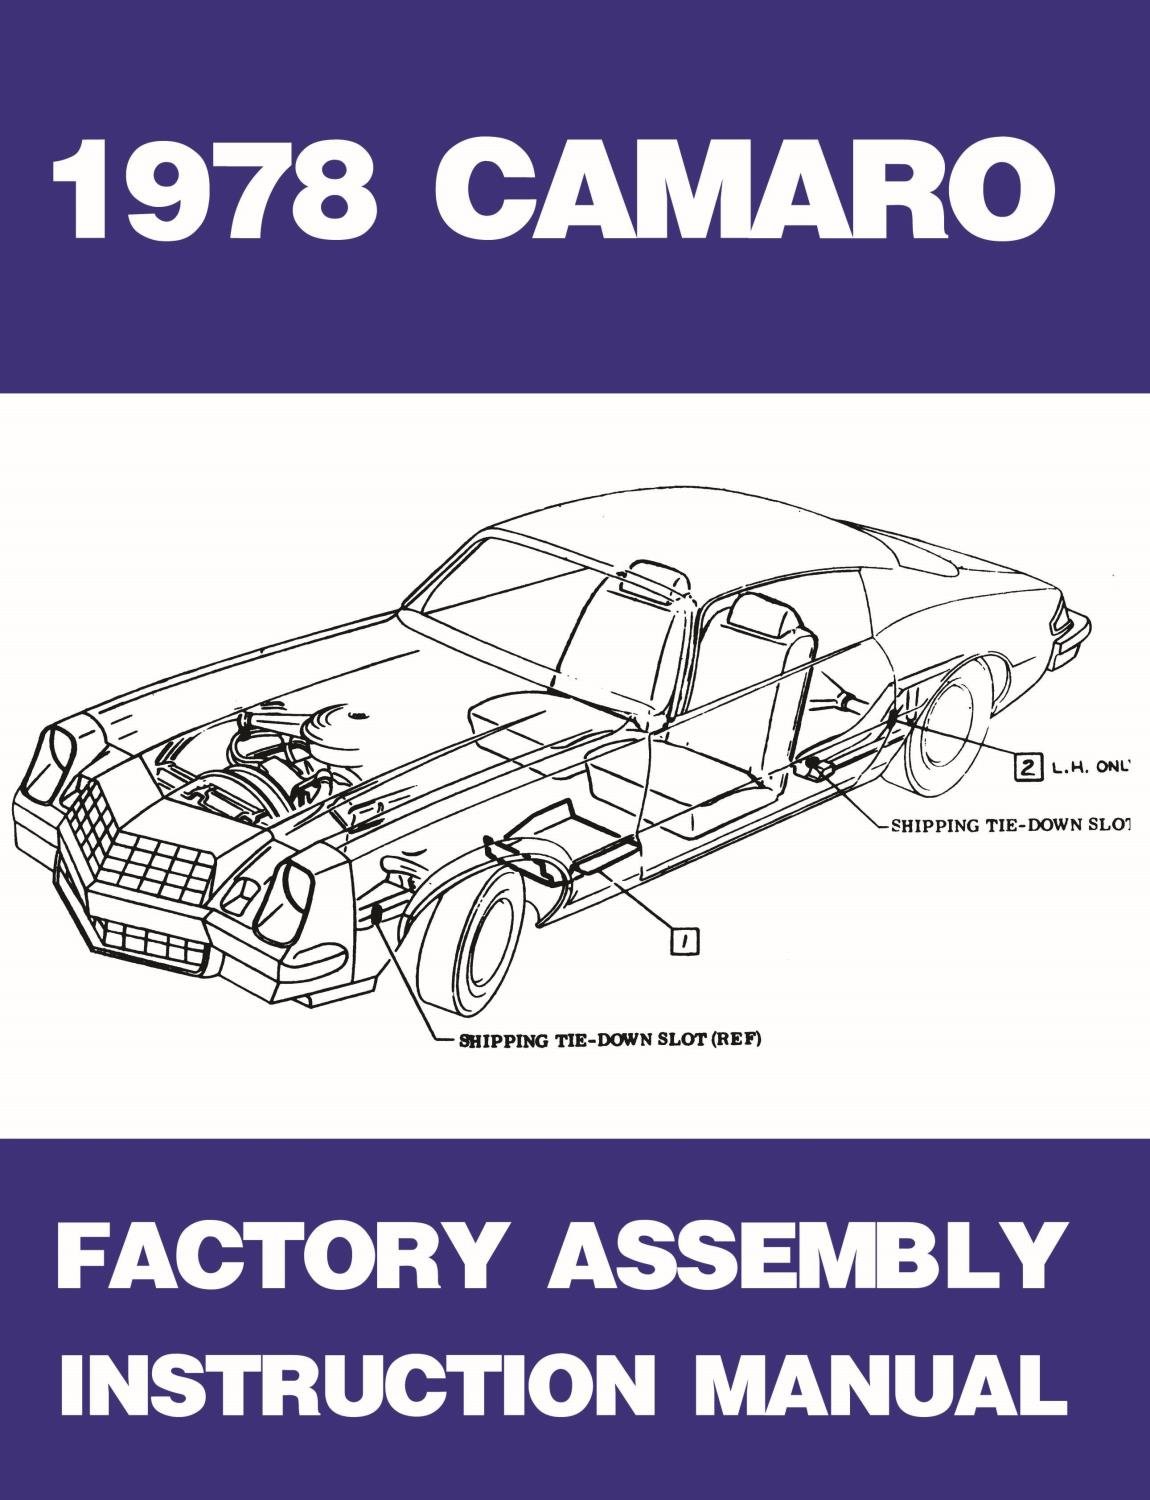 Factory Assembly Instruction Manual for 1978 Chevrolet Camaro